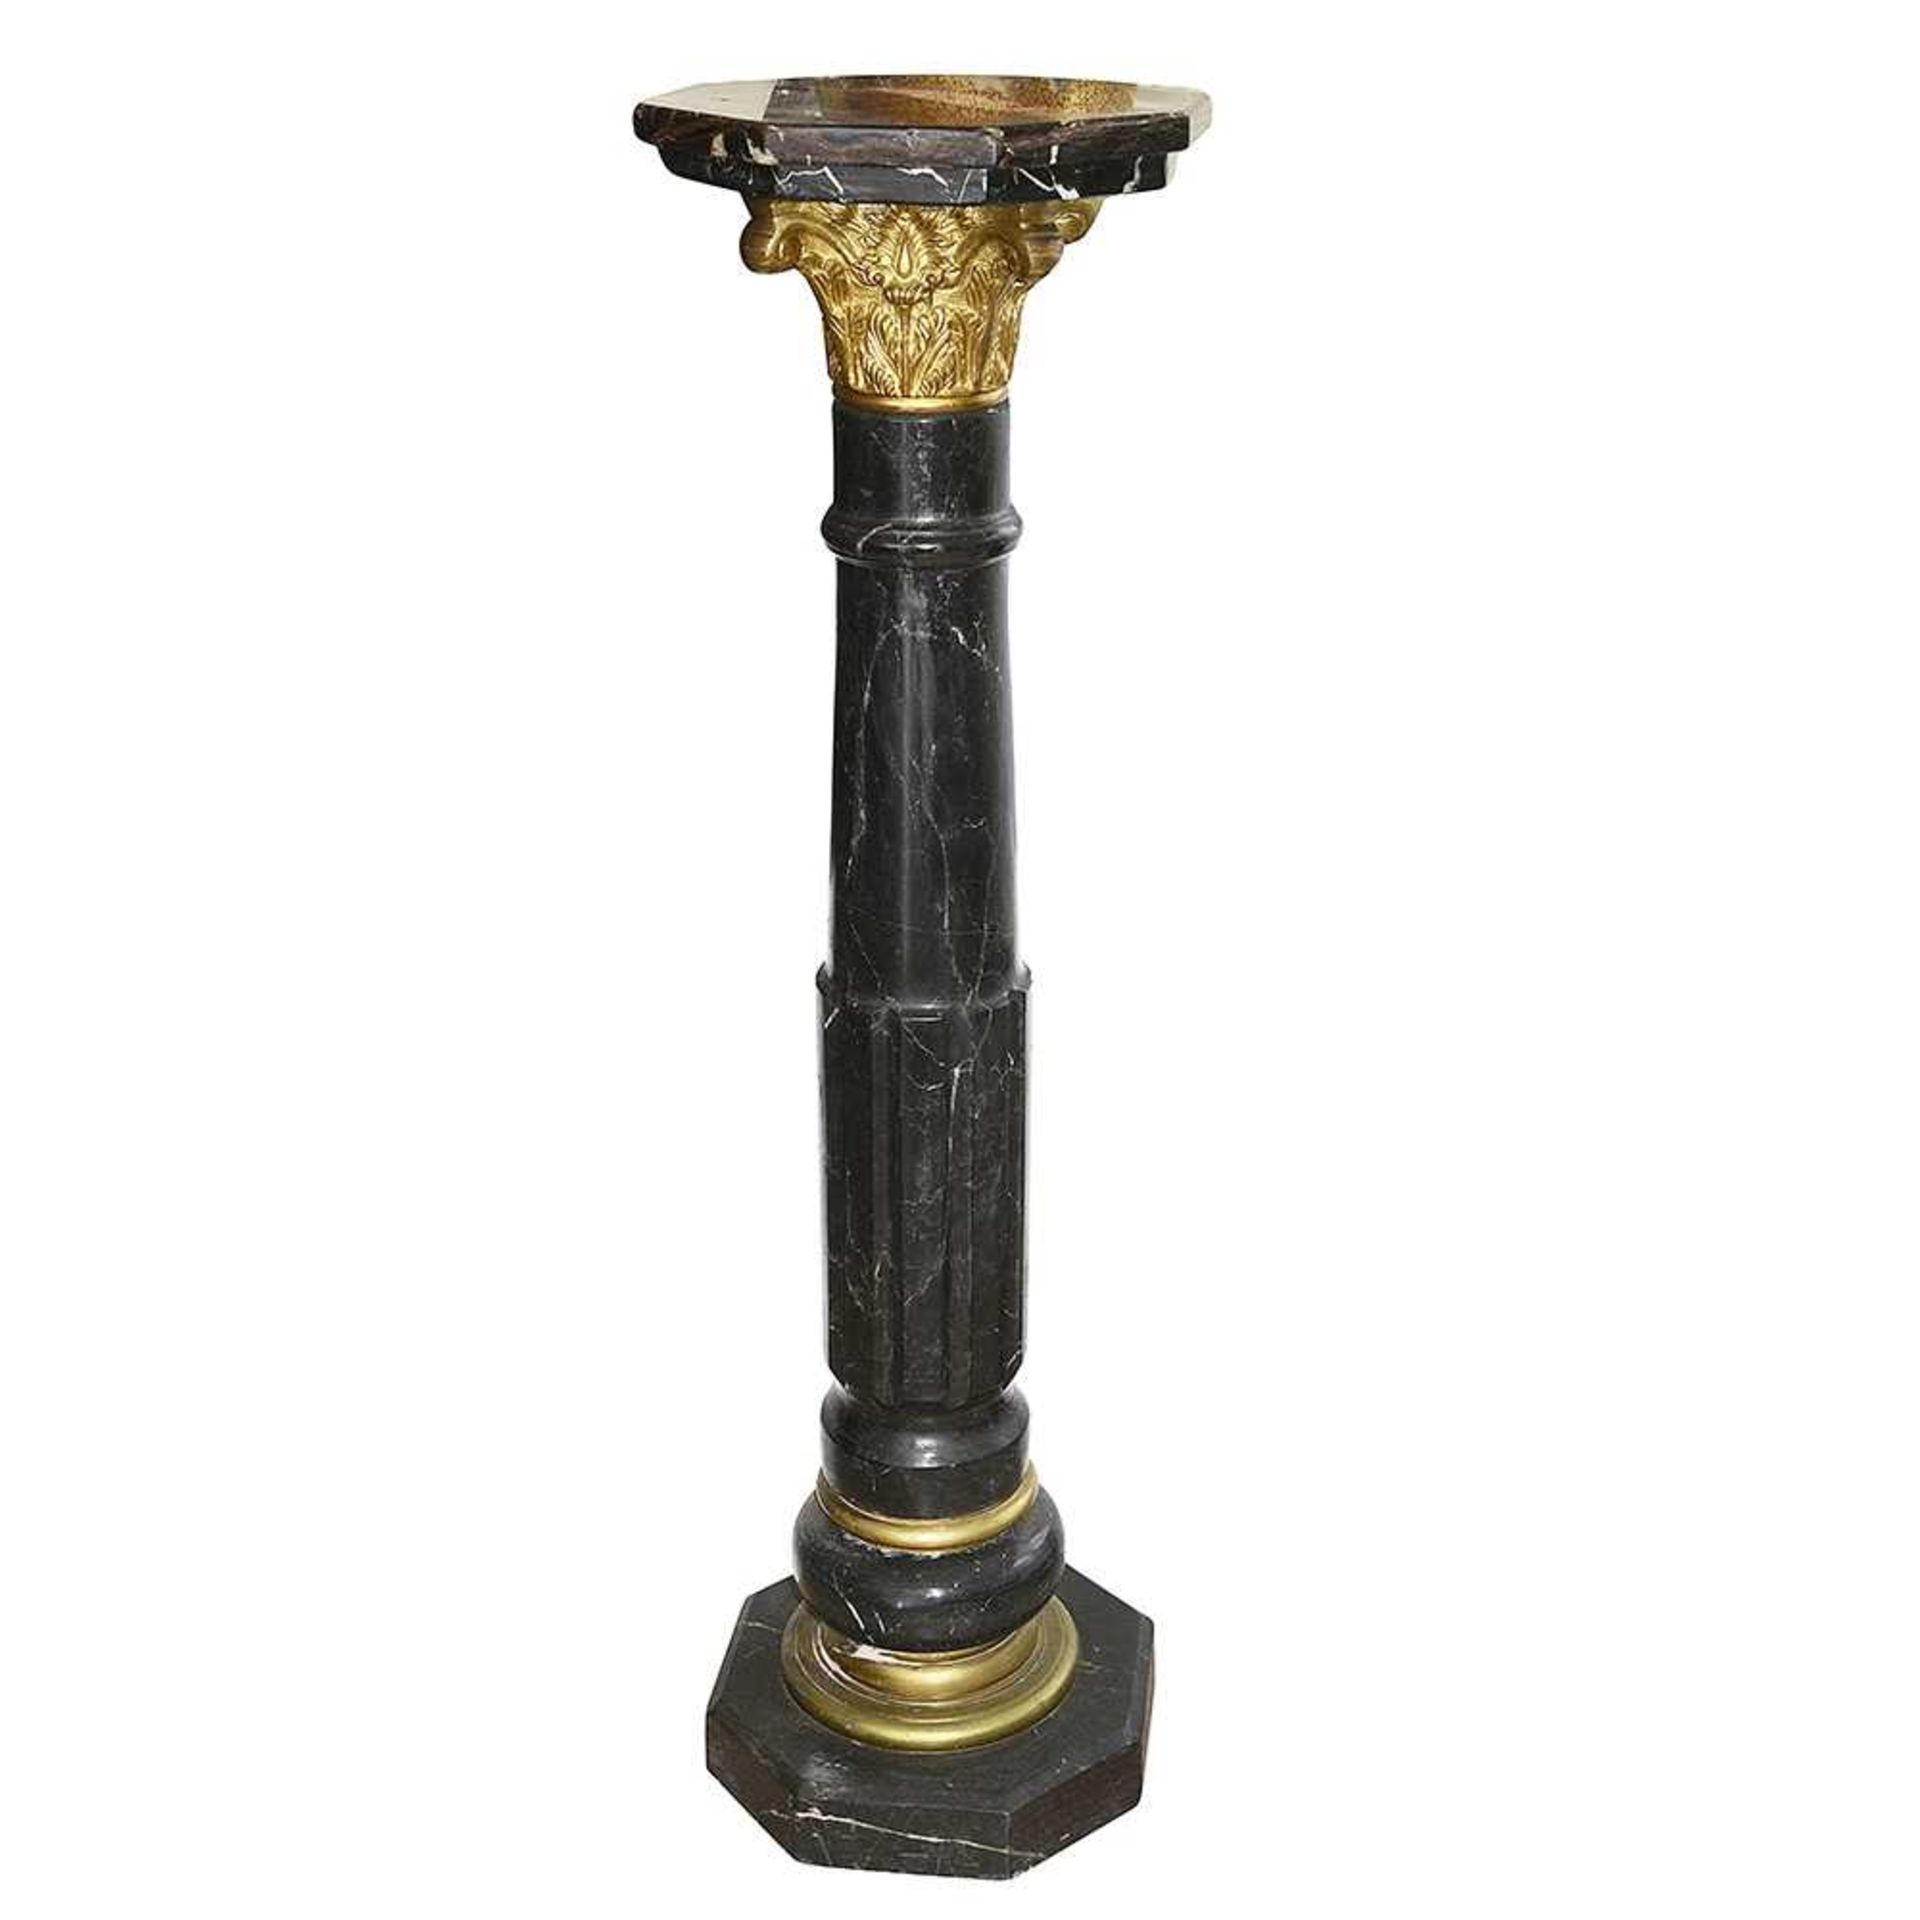 A LATE 19TH CENTURY BLACK MARBLE AND ORMOLU MOUNTED PEDESTAL